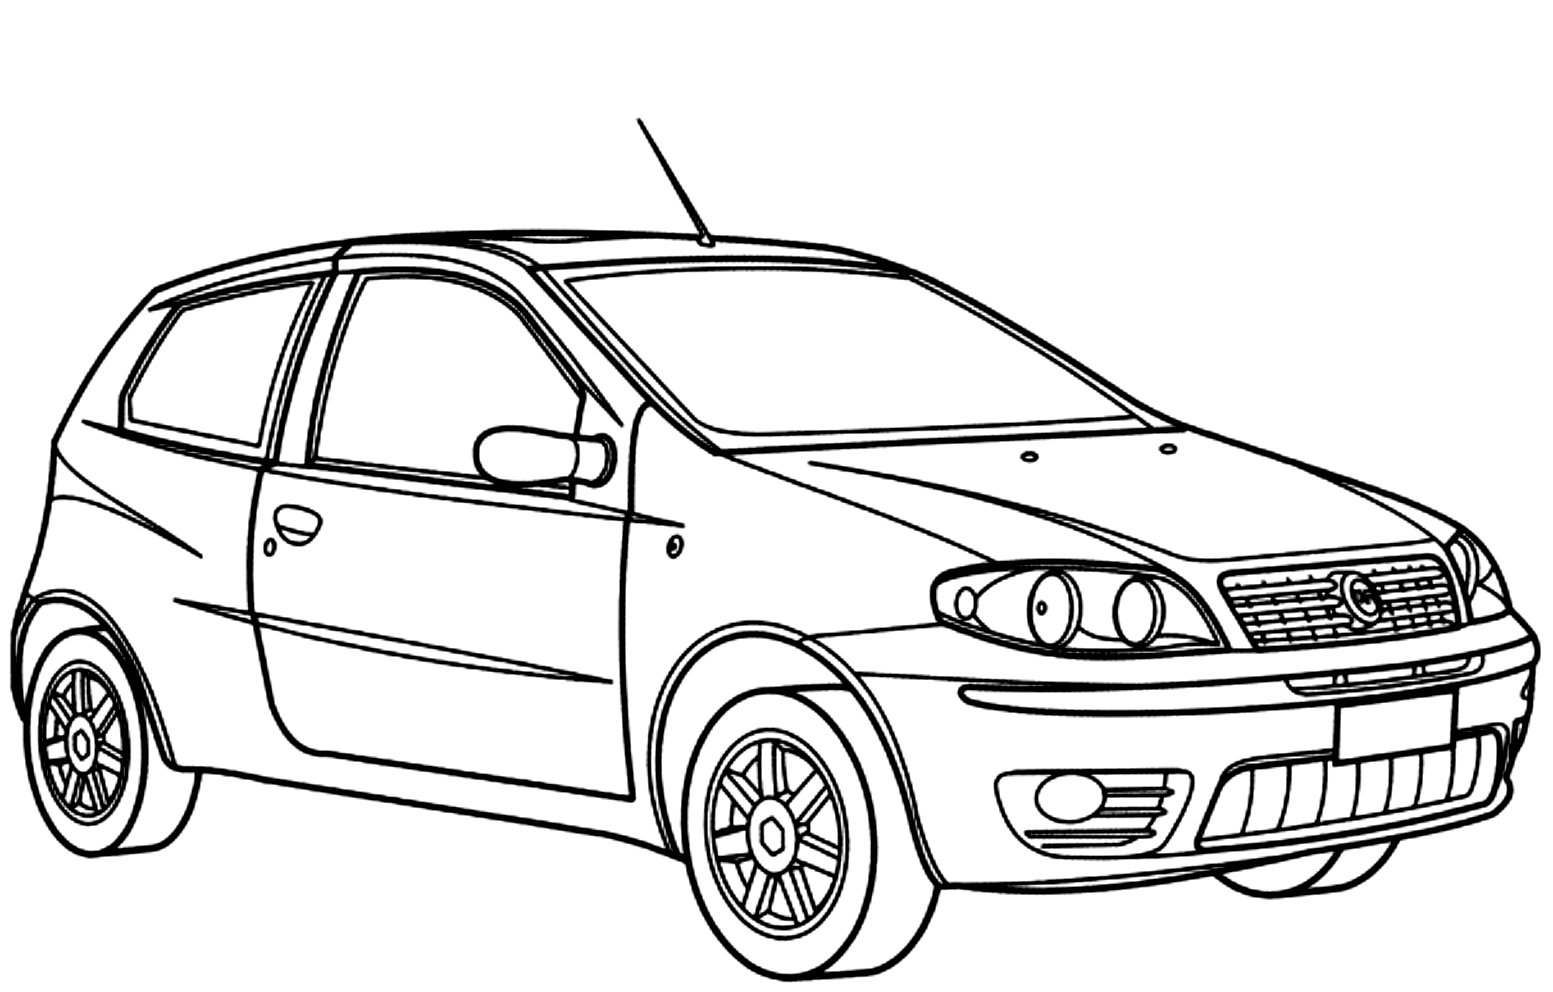 Drawing 16 from Automobiles coloring page to print and coloring